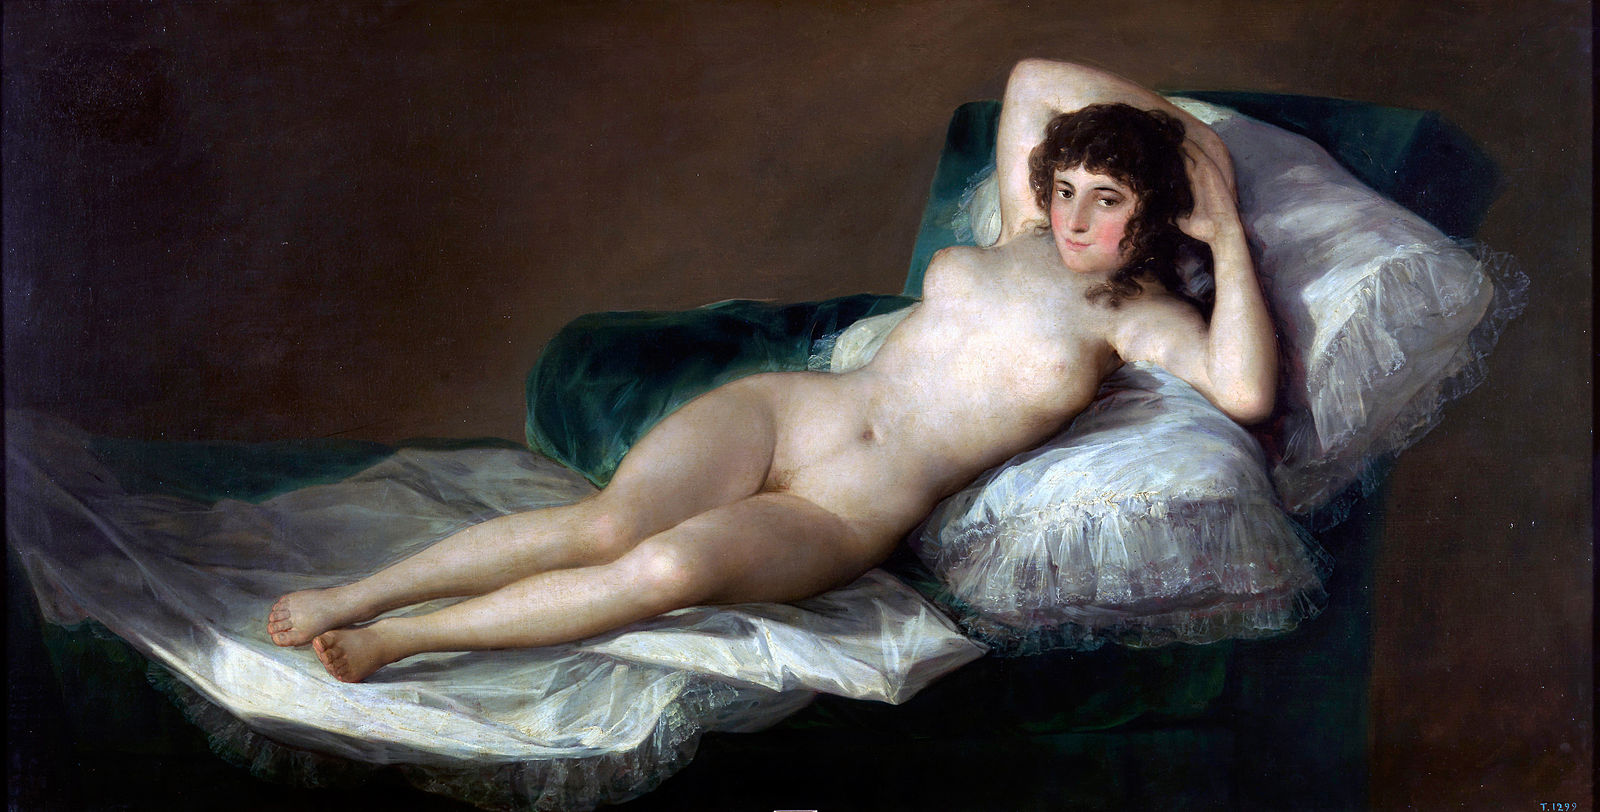 A nude woman reclining on a bed with white linen